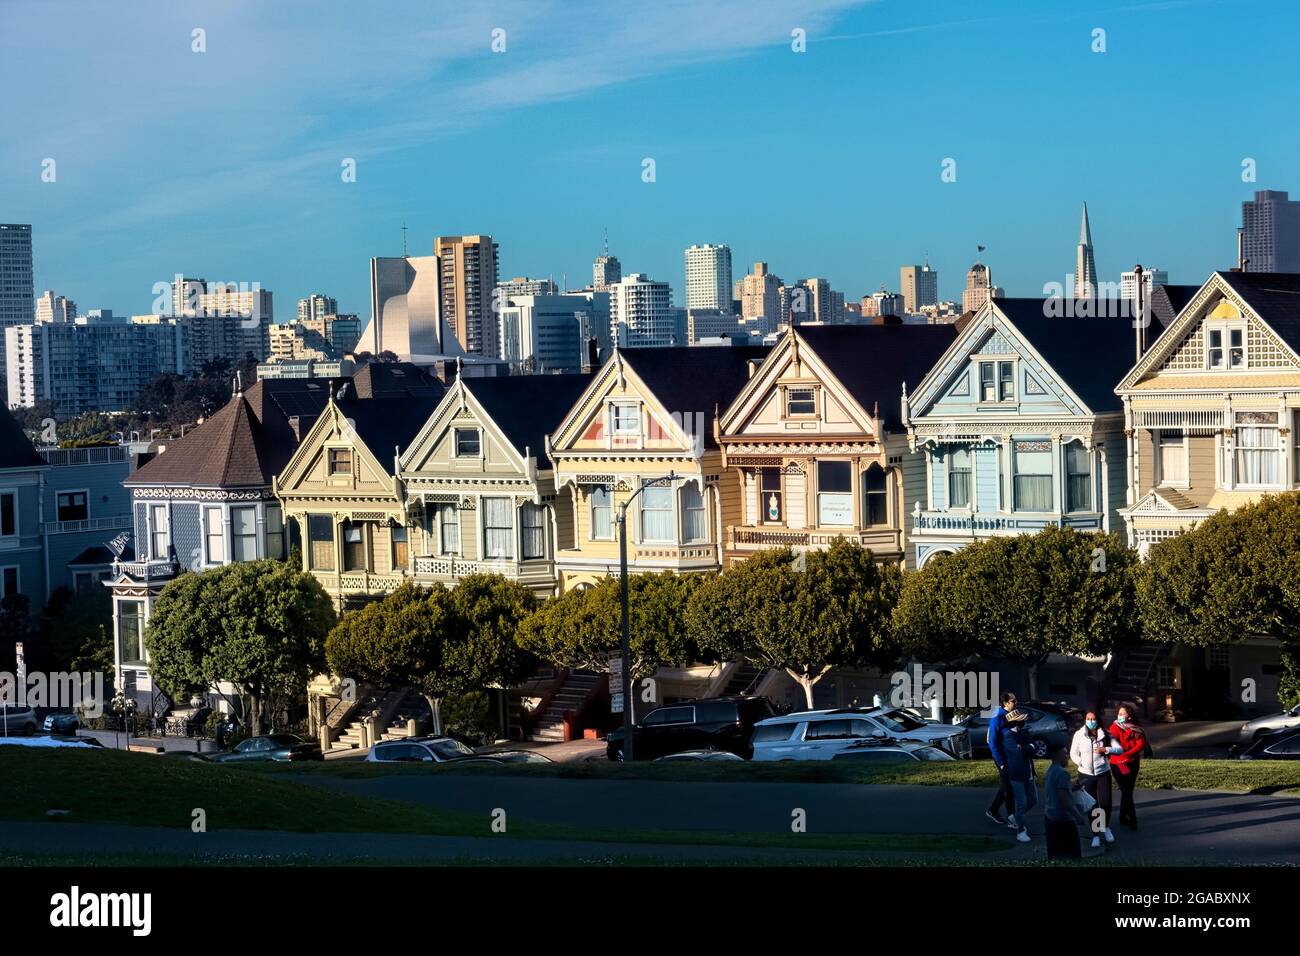 The famous “Painted Ladies” Victorian postcard row homes, San Francisco, California, U.S.A Stock Photo